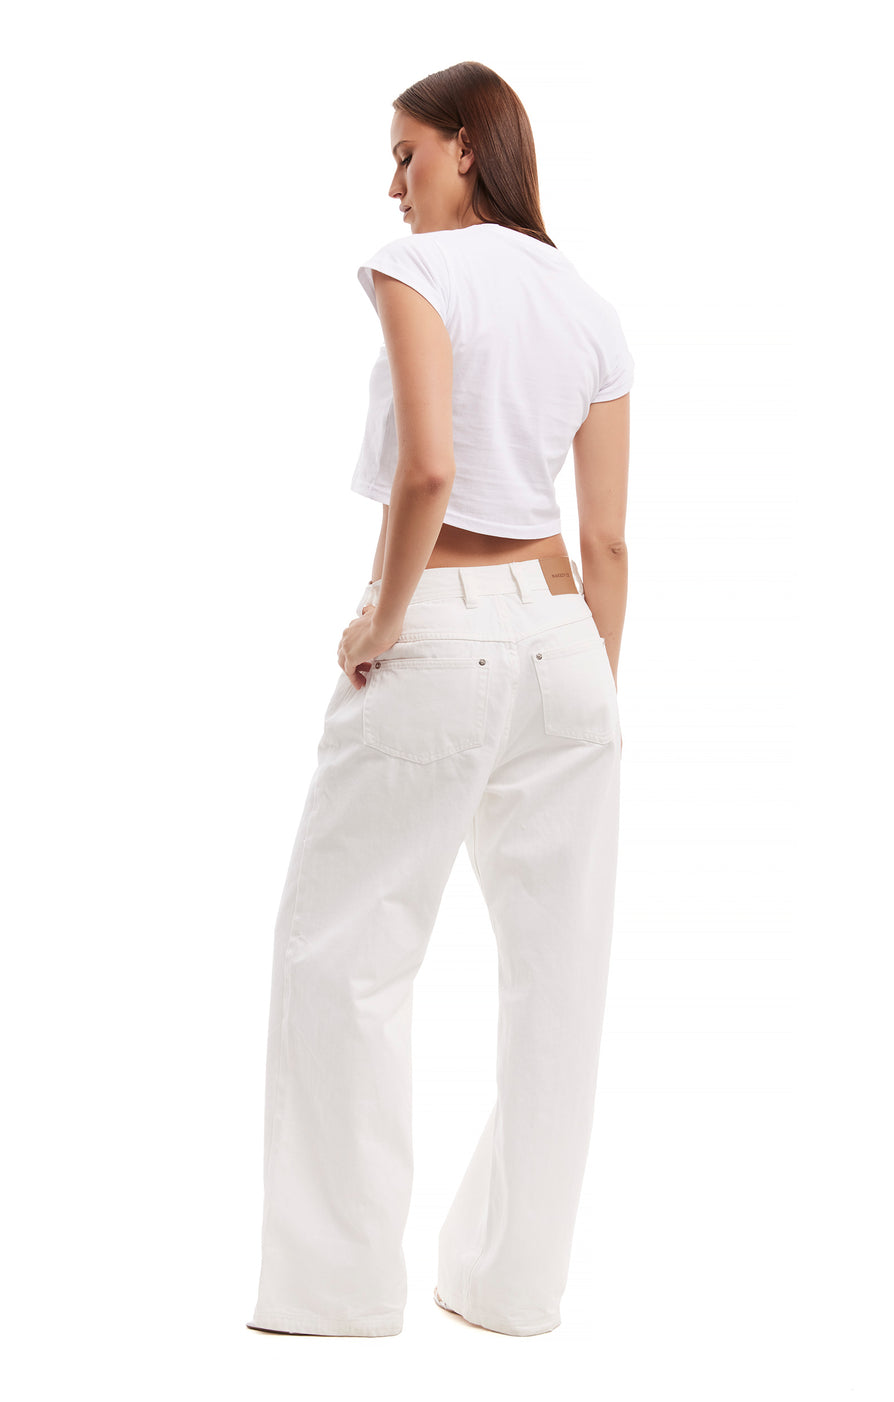 THE MAXWELL JEAN WHITE | model